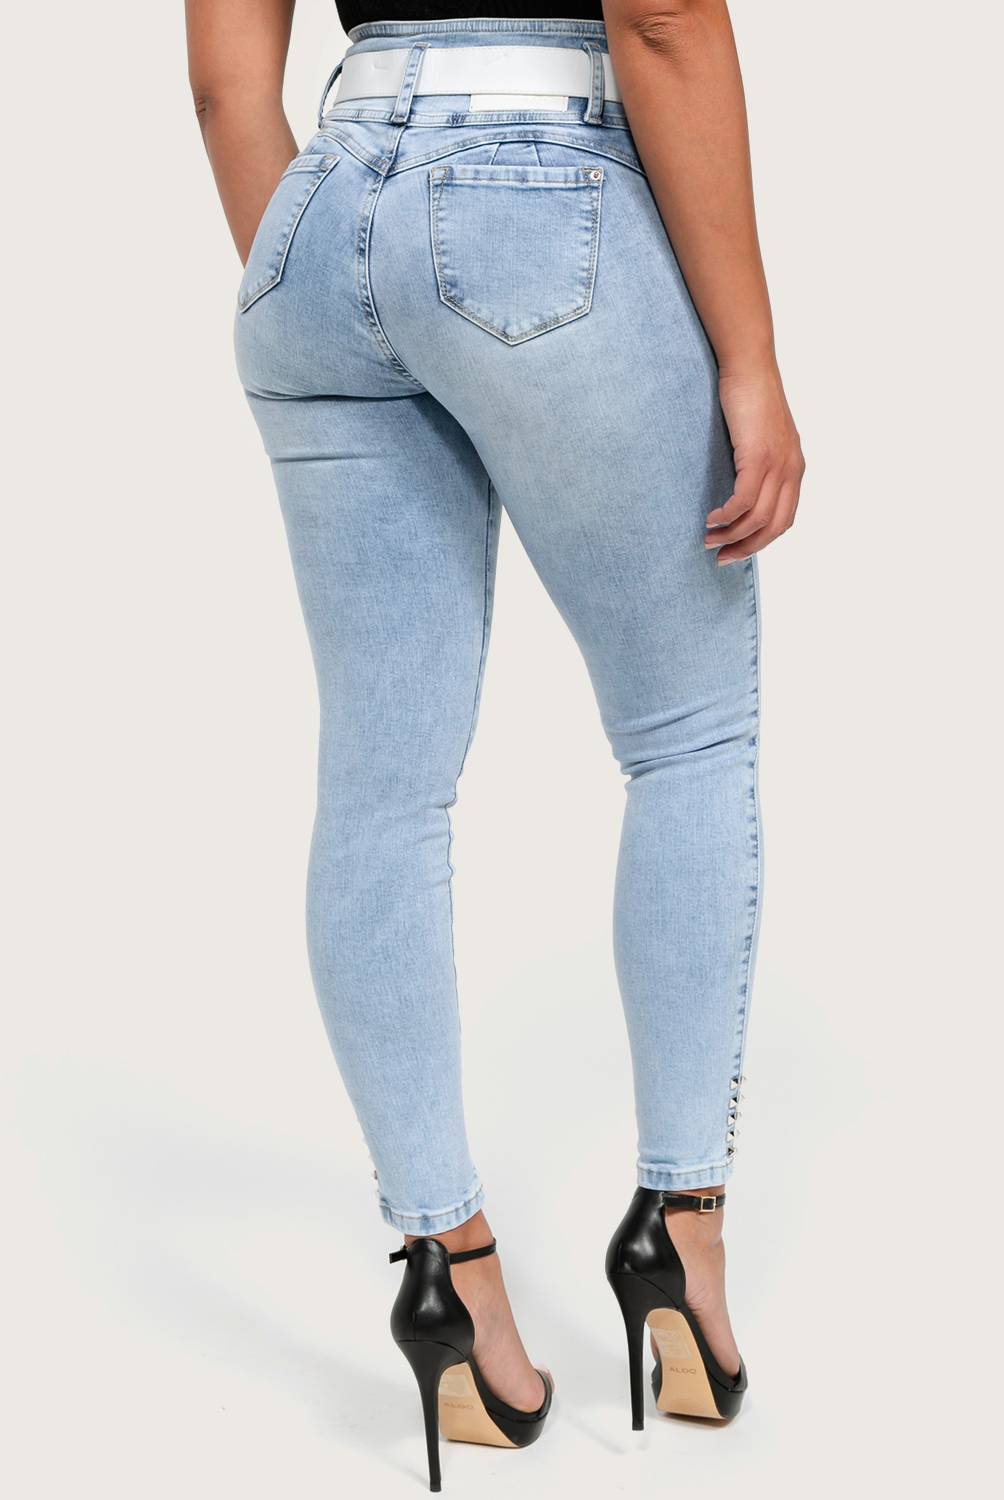 MOSSIMO - Jeans Skinny Roturas Mujer